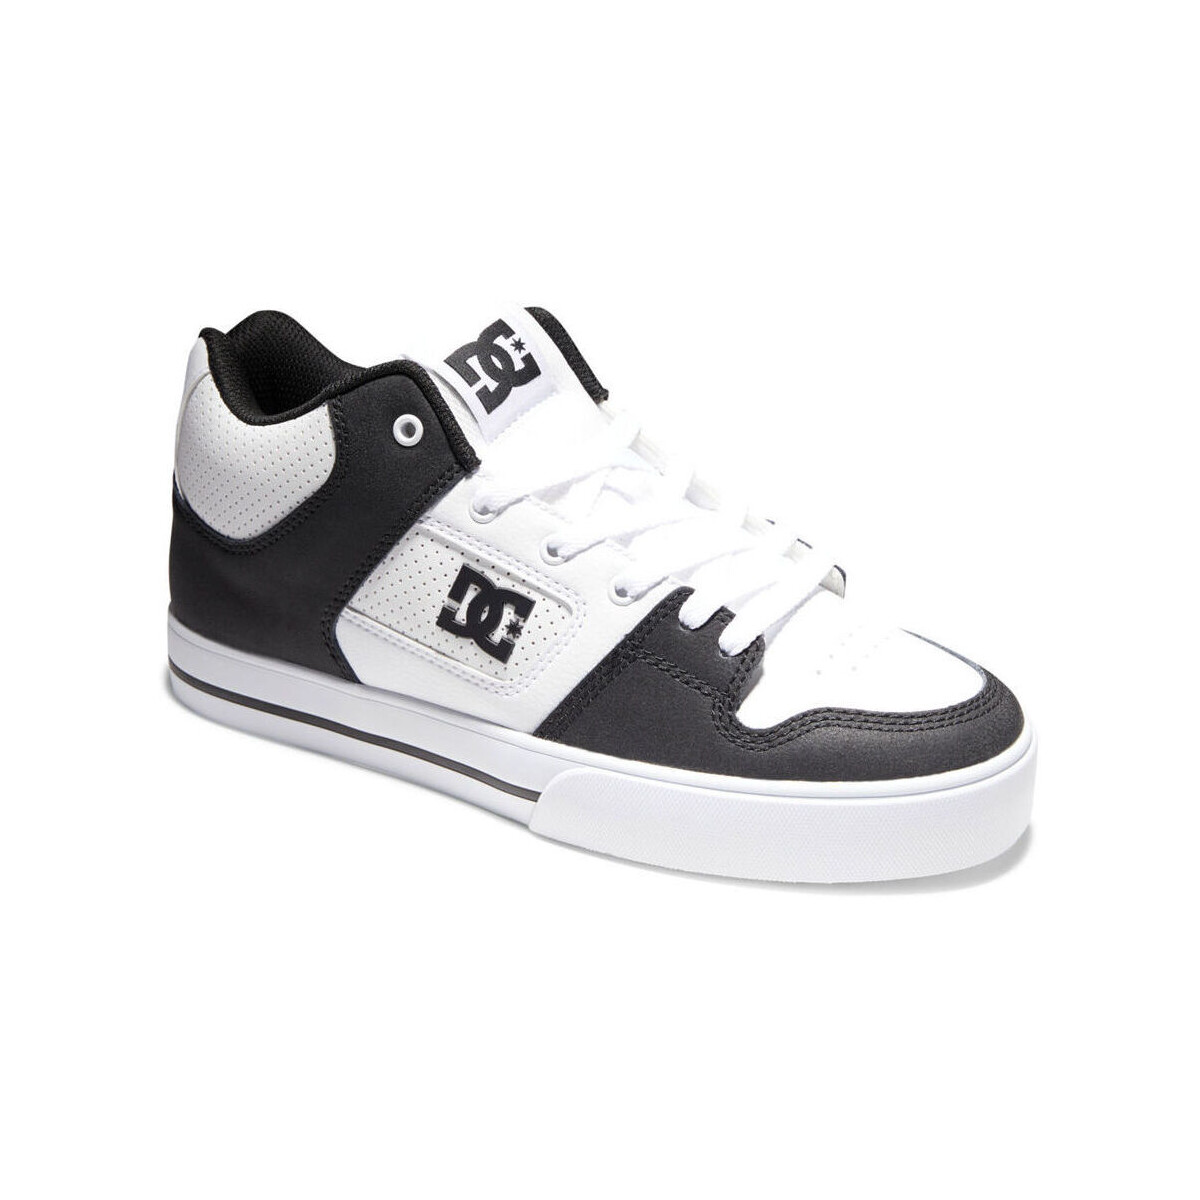 Schoenen Heren Sneakers DC Shoes Pure mid ADYS400082 WHITE/BLACK/WHITE (WBI) Wit